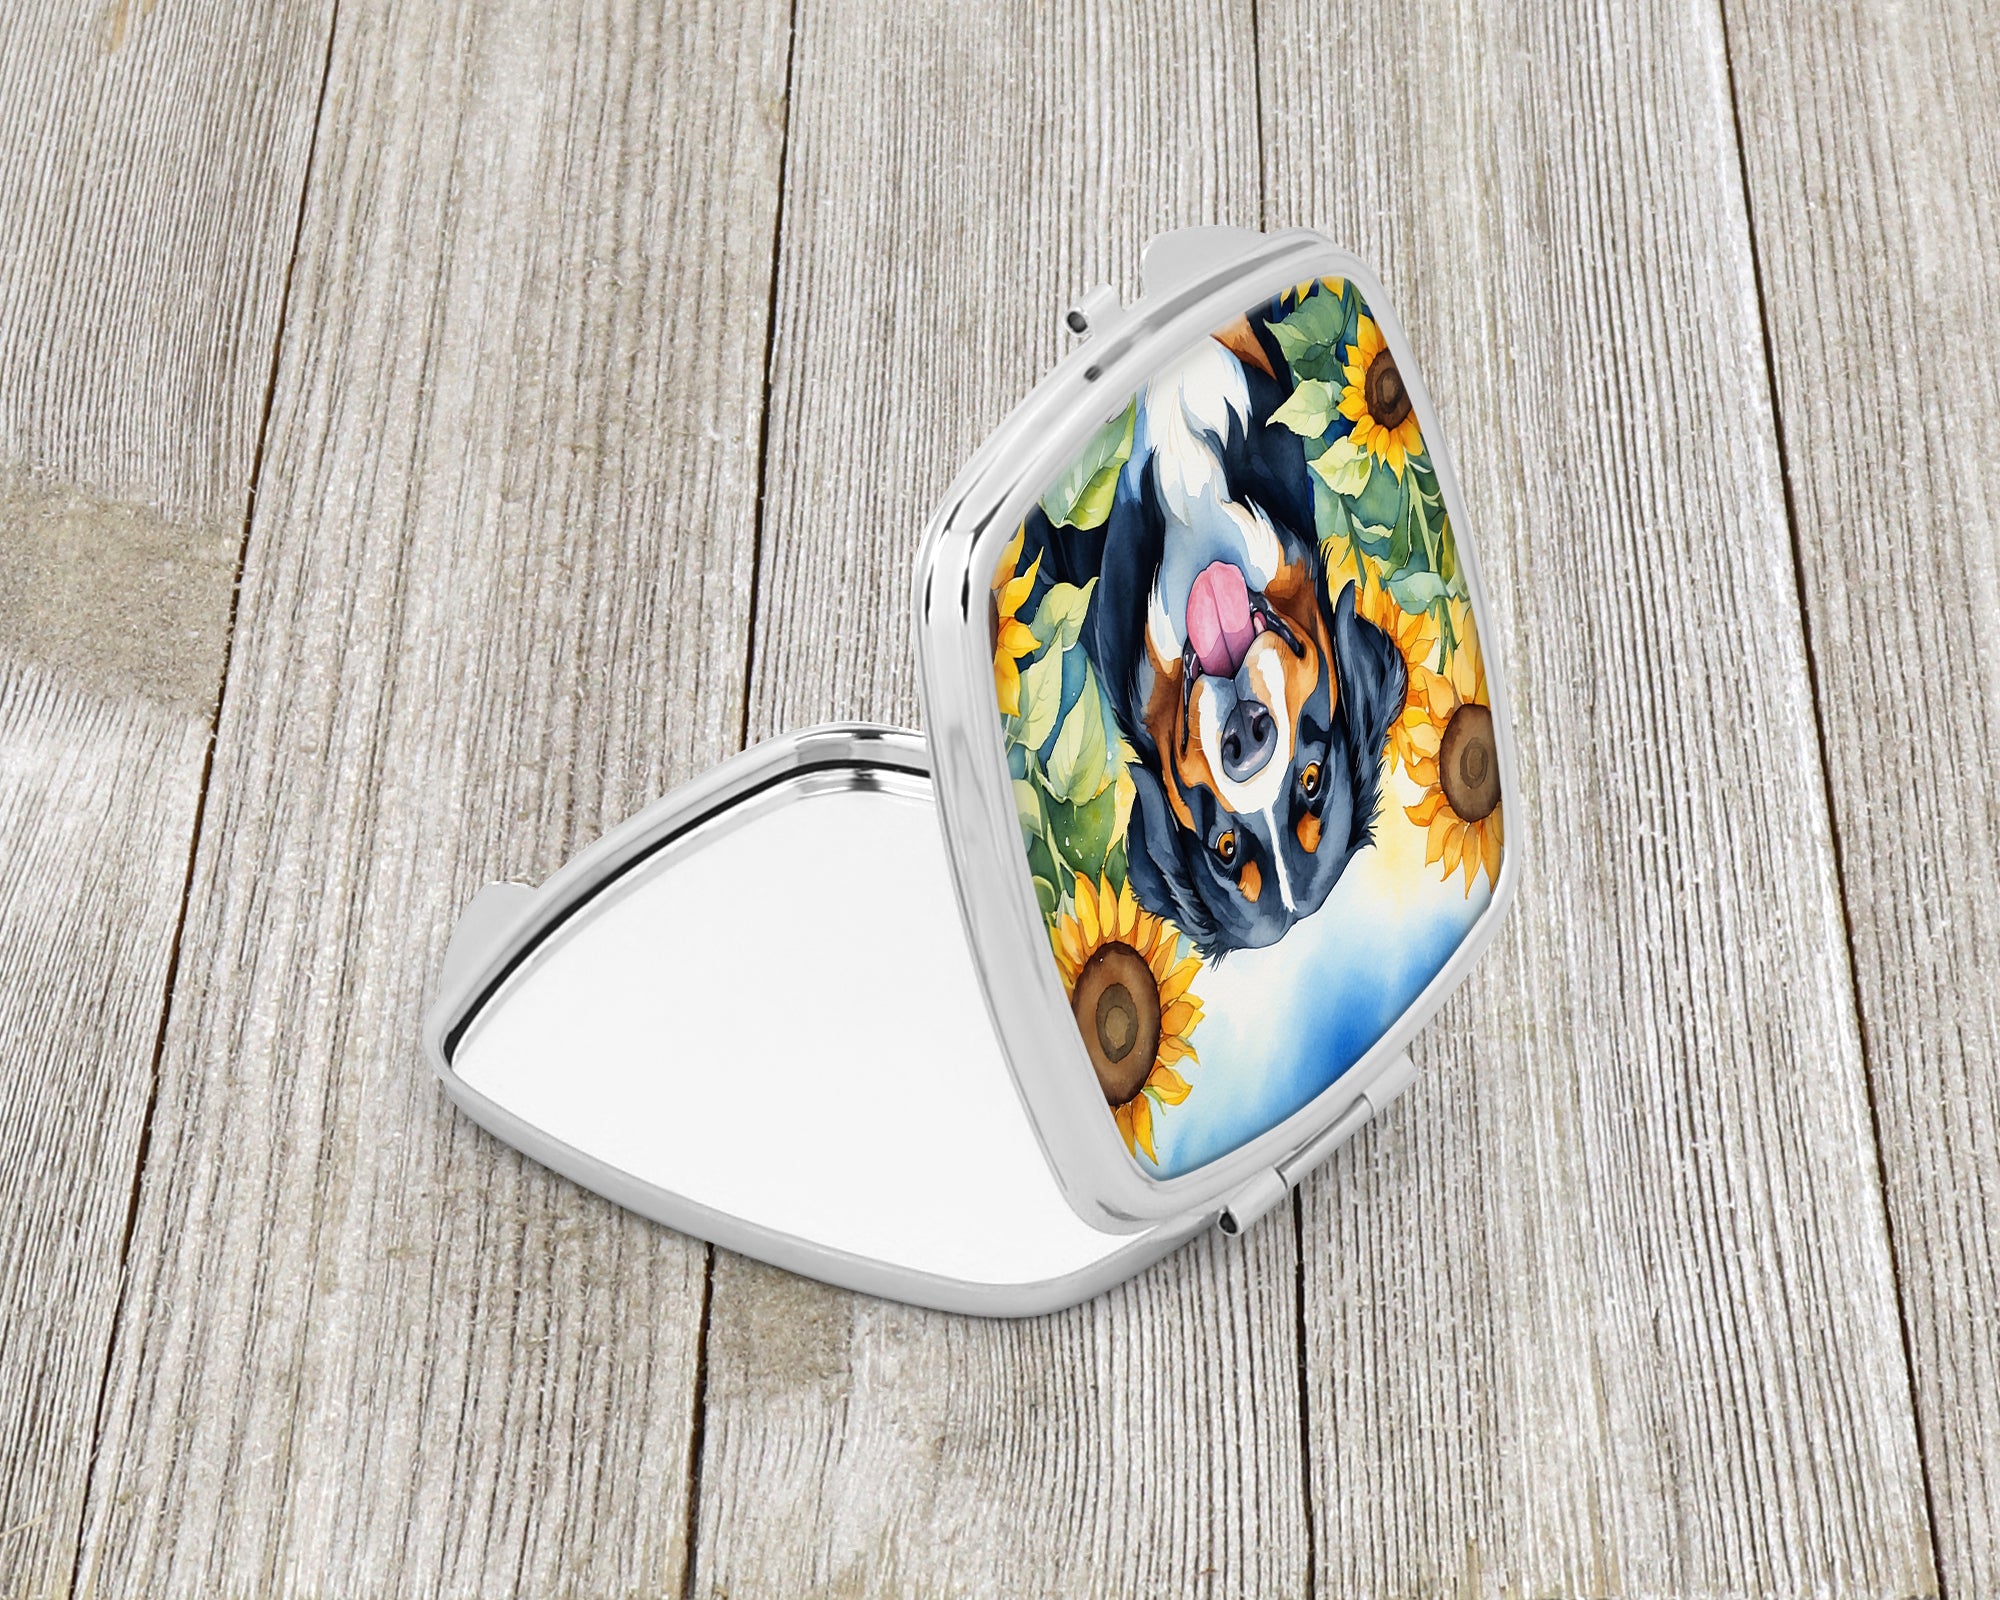 Bernese Mountain Dog in Sunflowers Compact Mirror